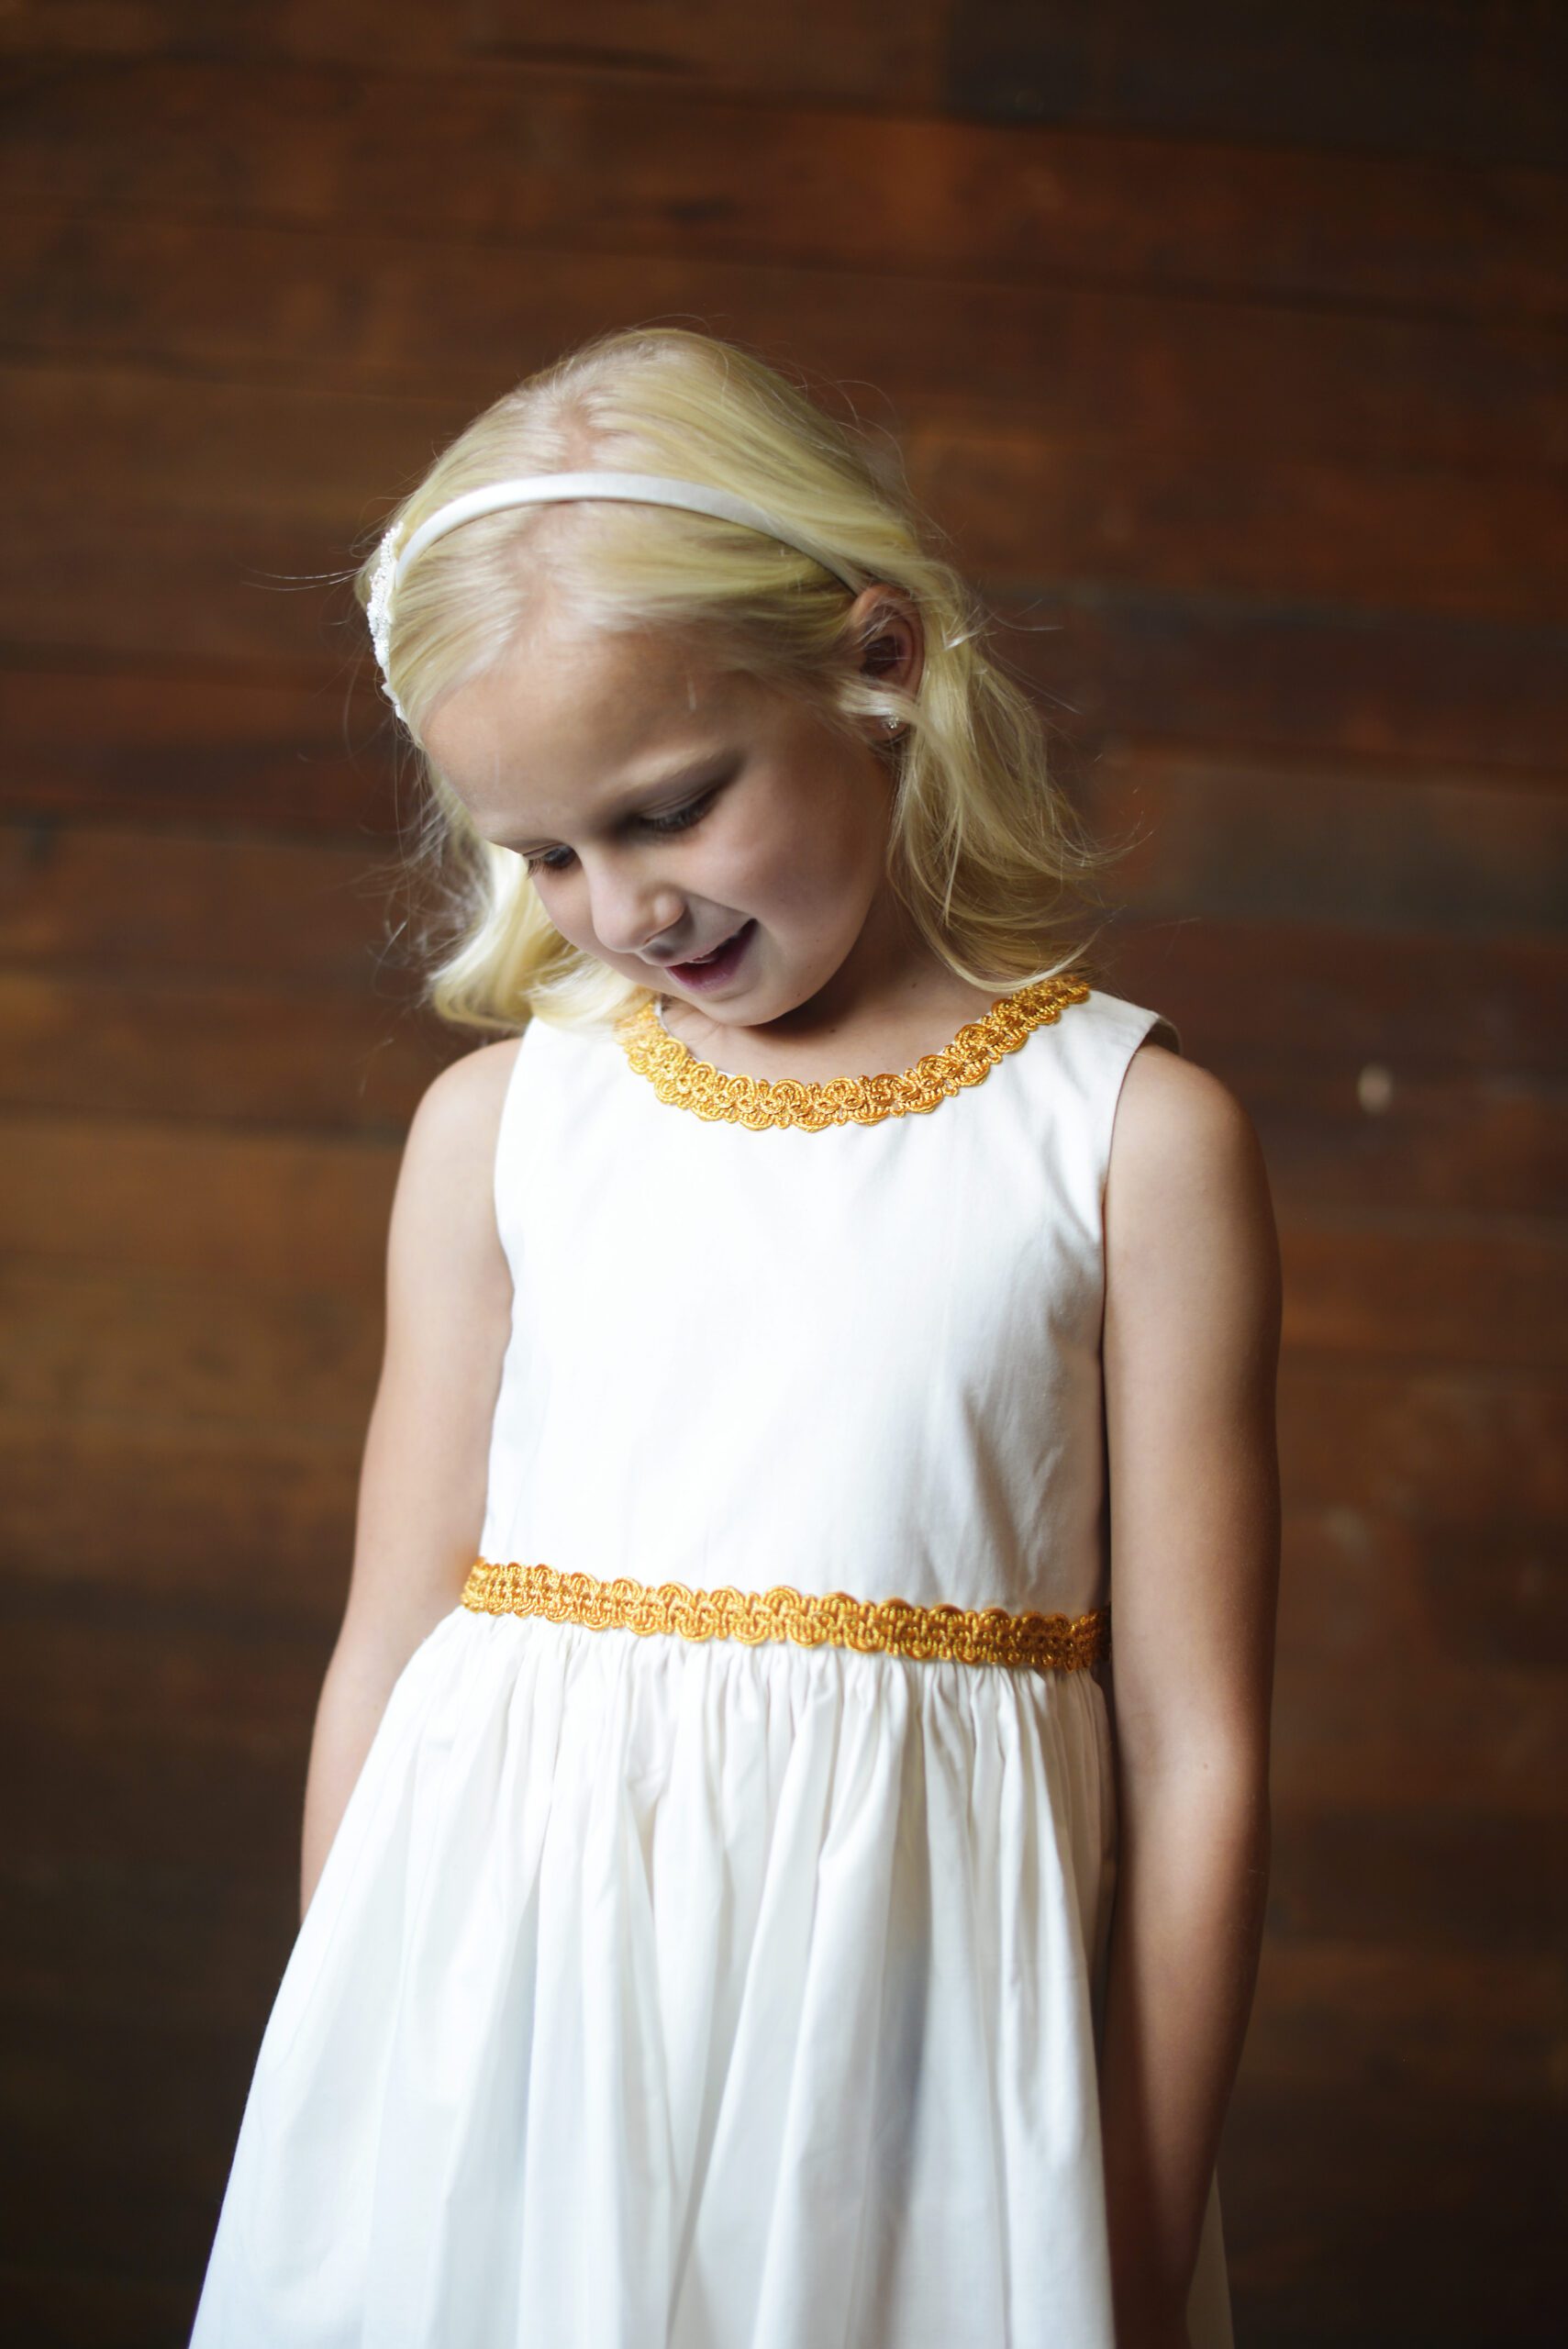 A photo of a 6 year old flower girl wearing a cotton dress with gold brocade around the waist